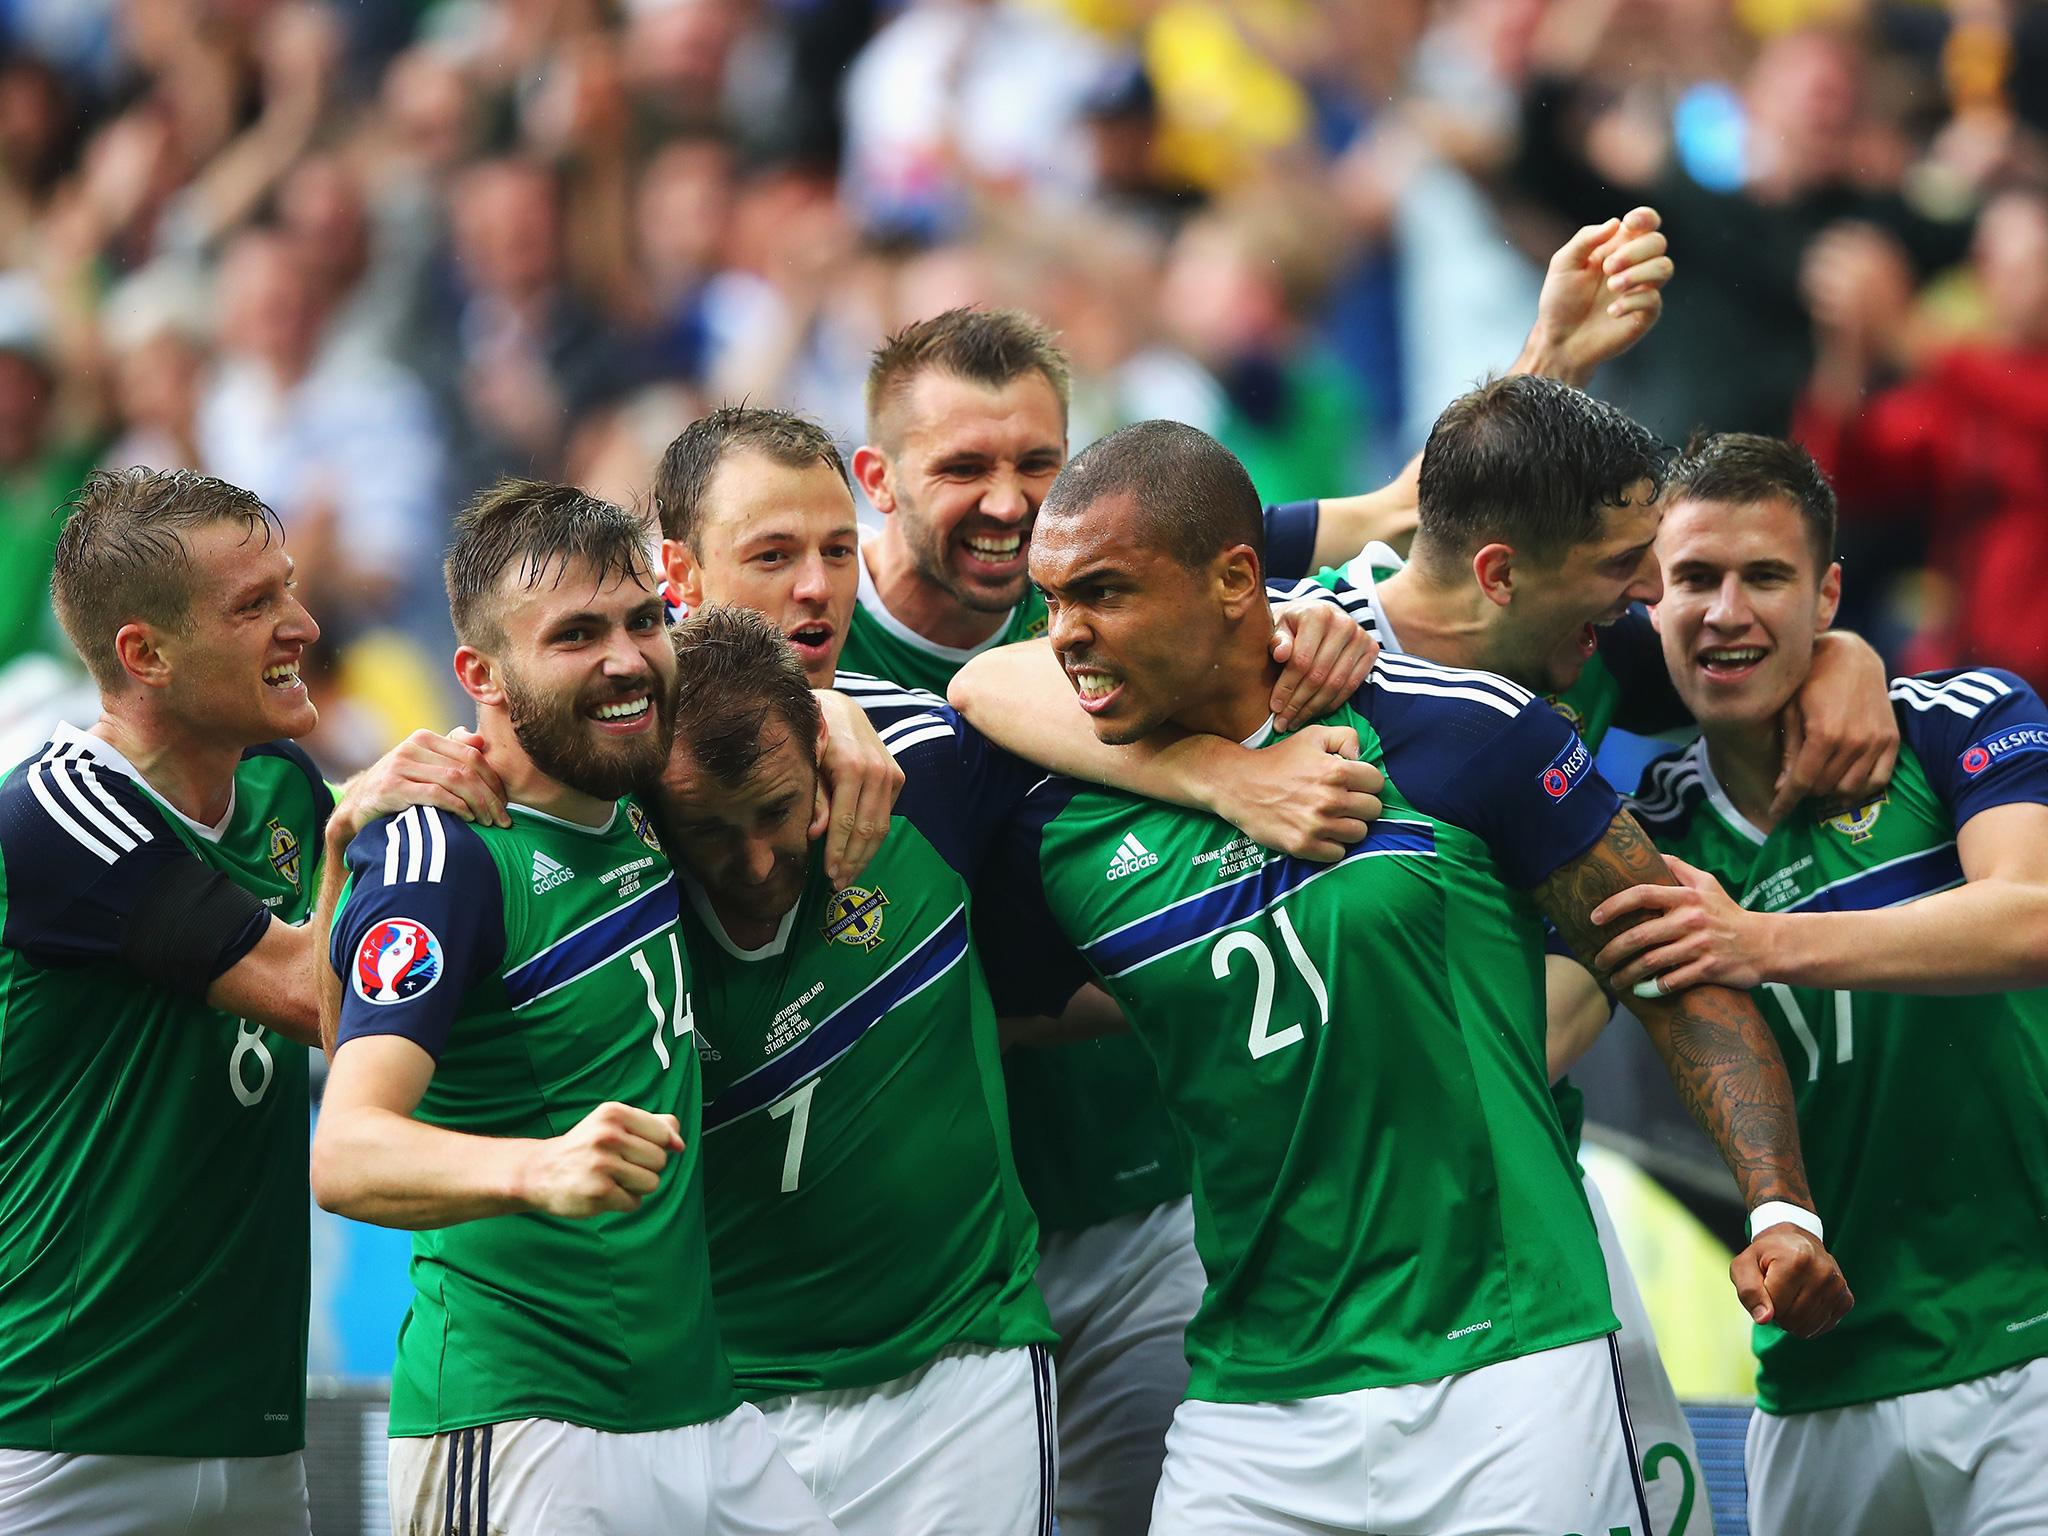 Northern Ireland's players celebrate their victory over Ukraine